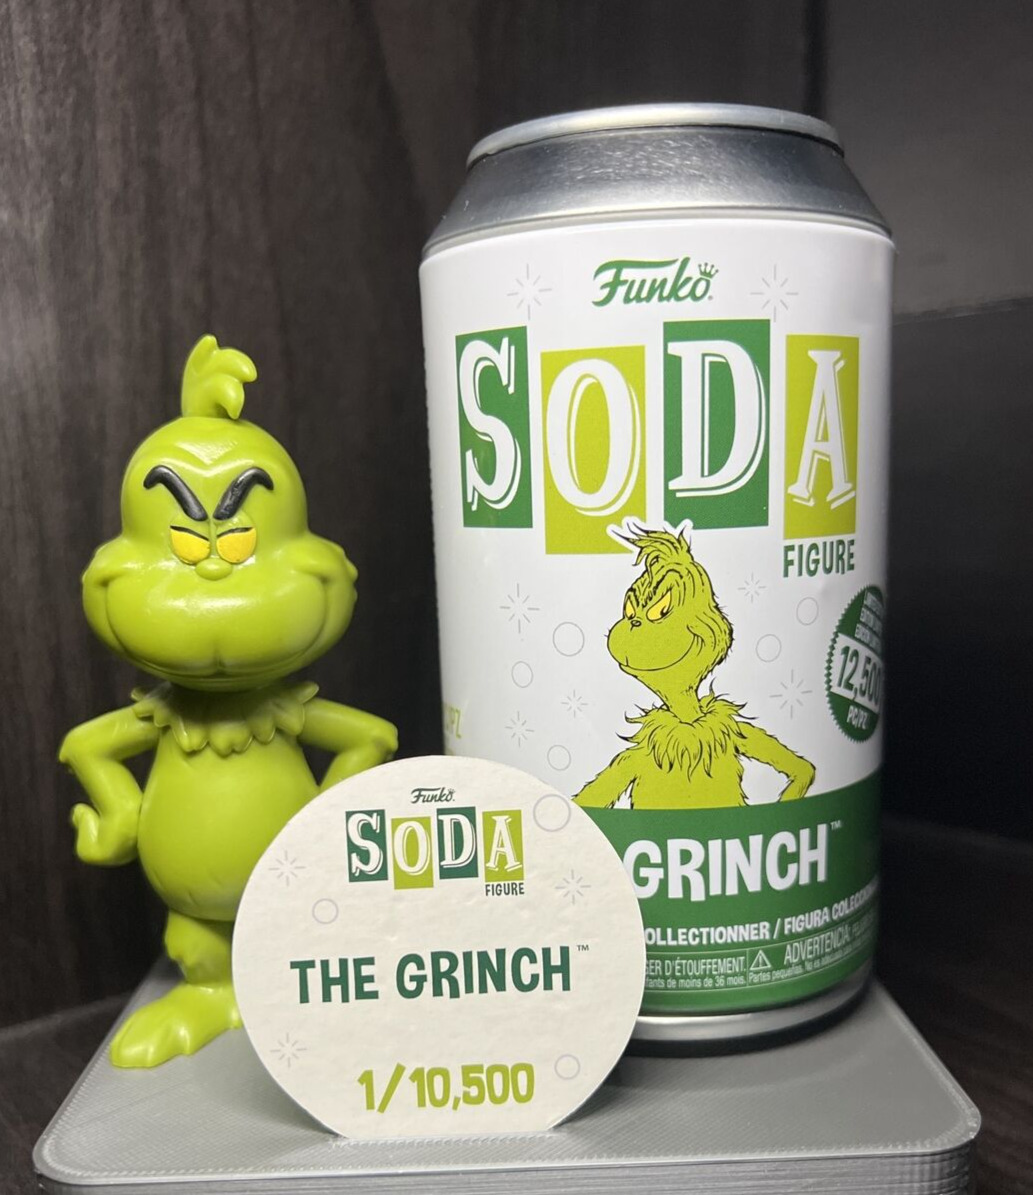 Funko Soda The Grinch Dr Seuss How The Grinch Stole Christmas Figure 1 in 10500